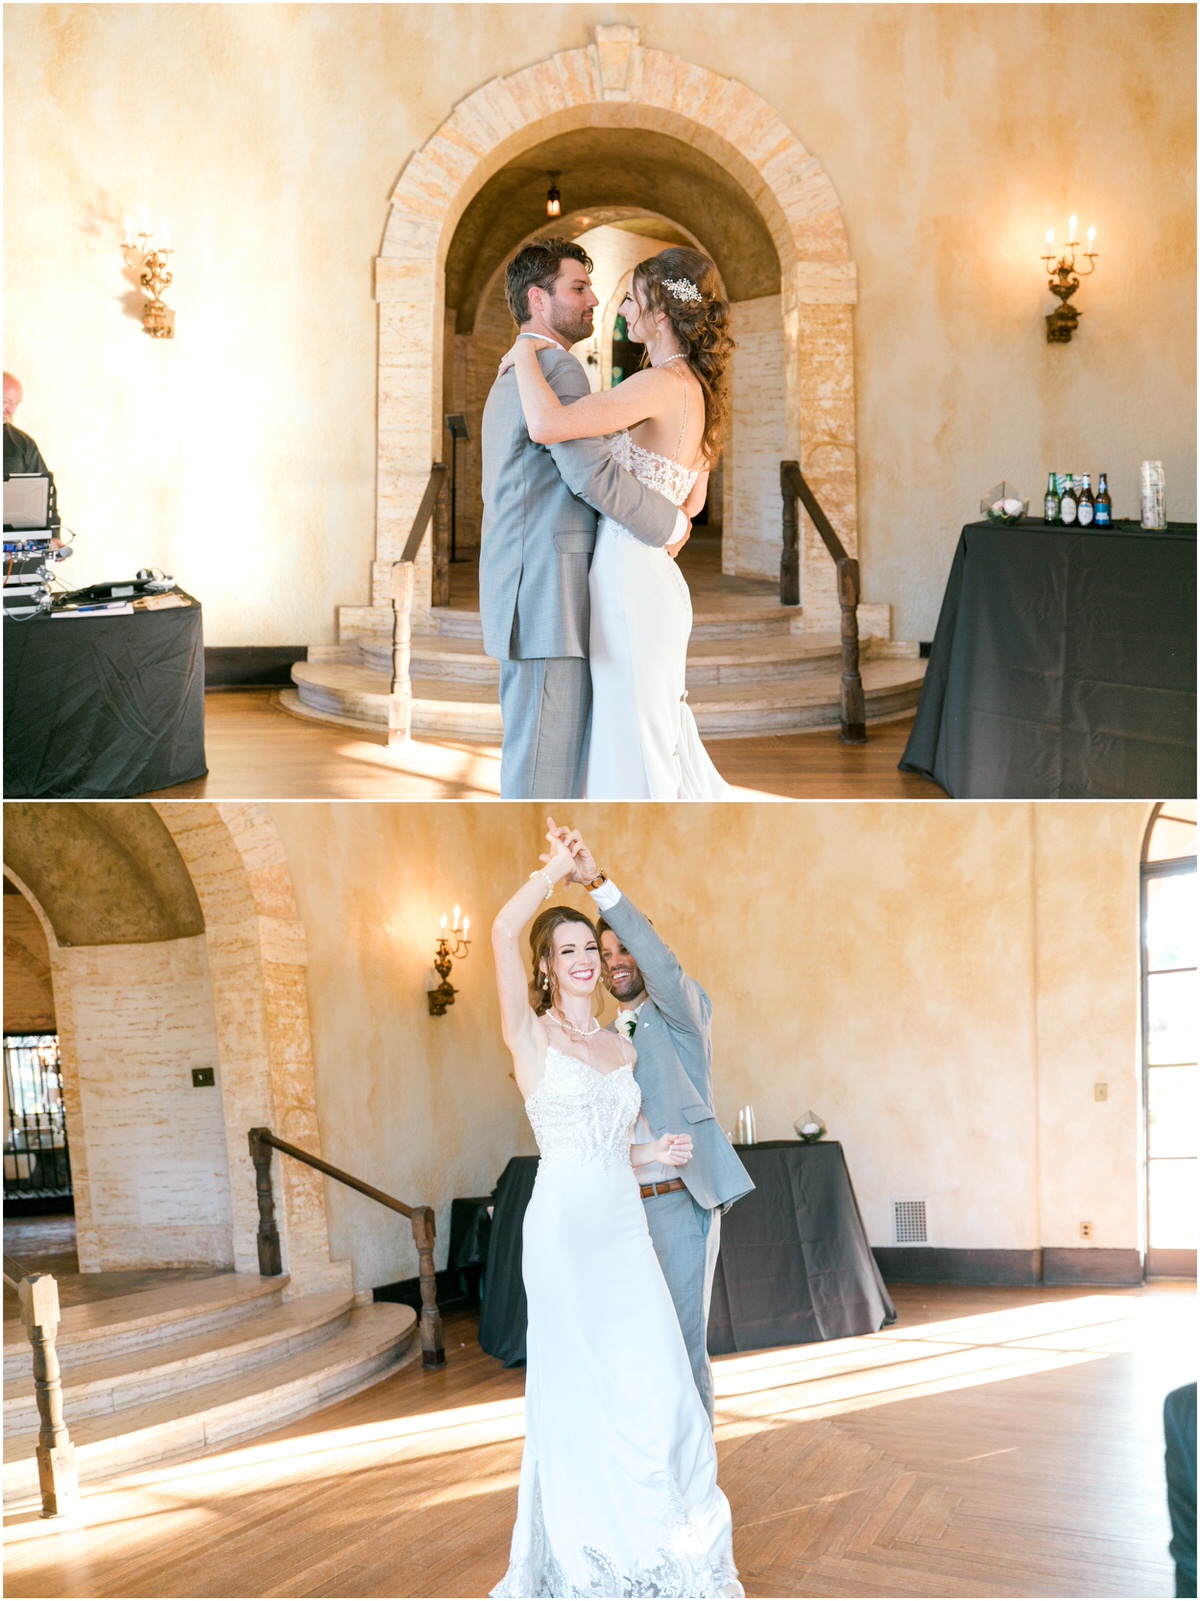 Bride and groom having their first dance as husband and wife